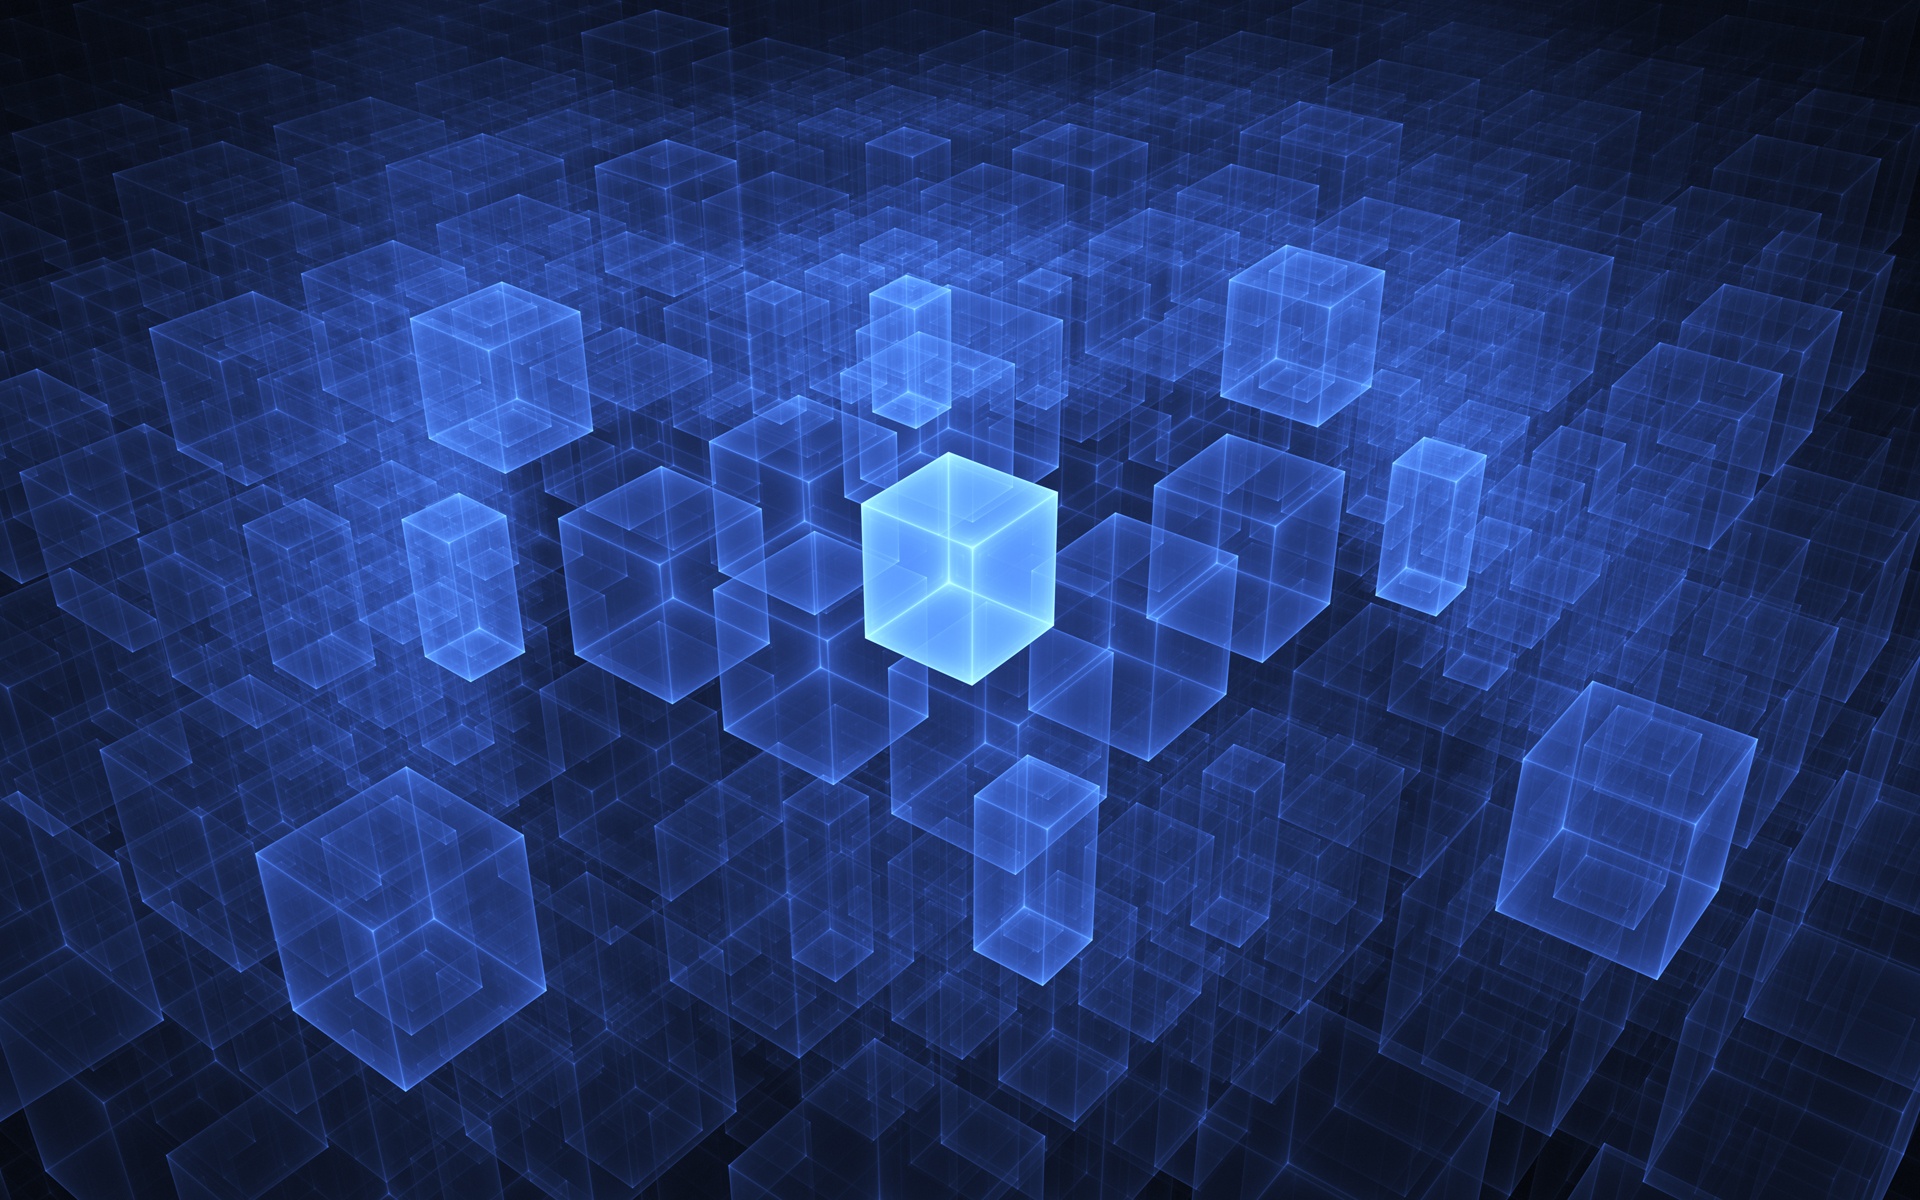 Digital blue cubes - Wallpapercase Free HD Backgrounds